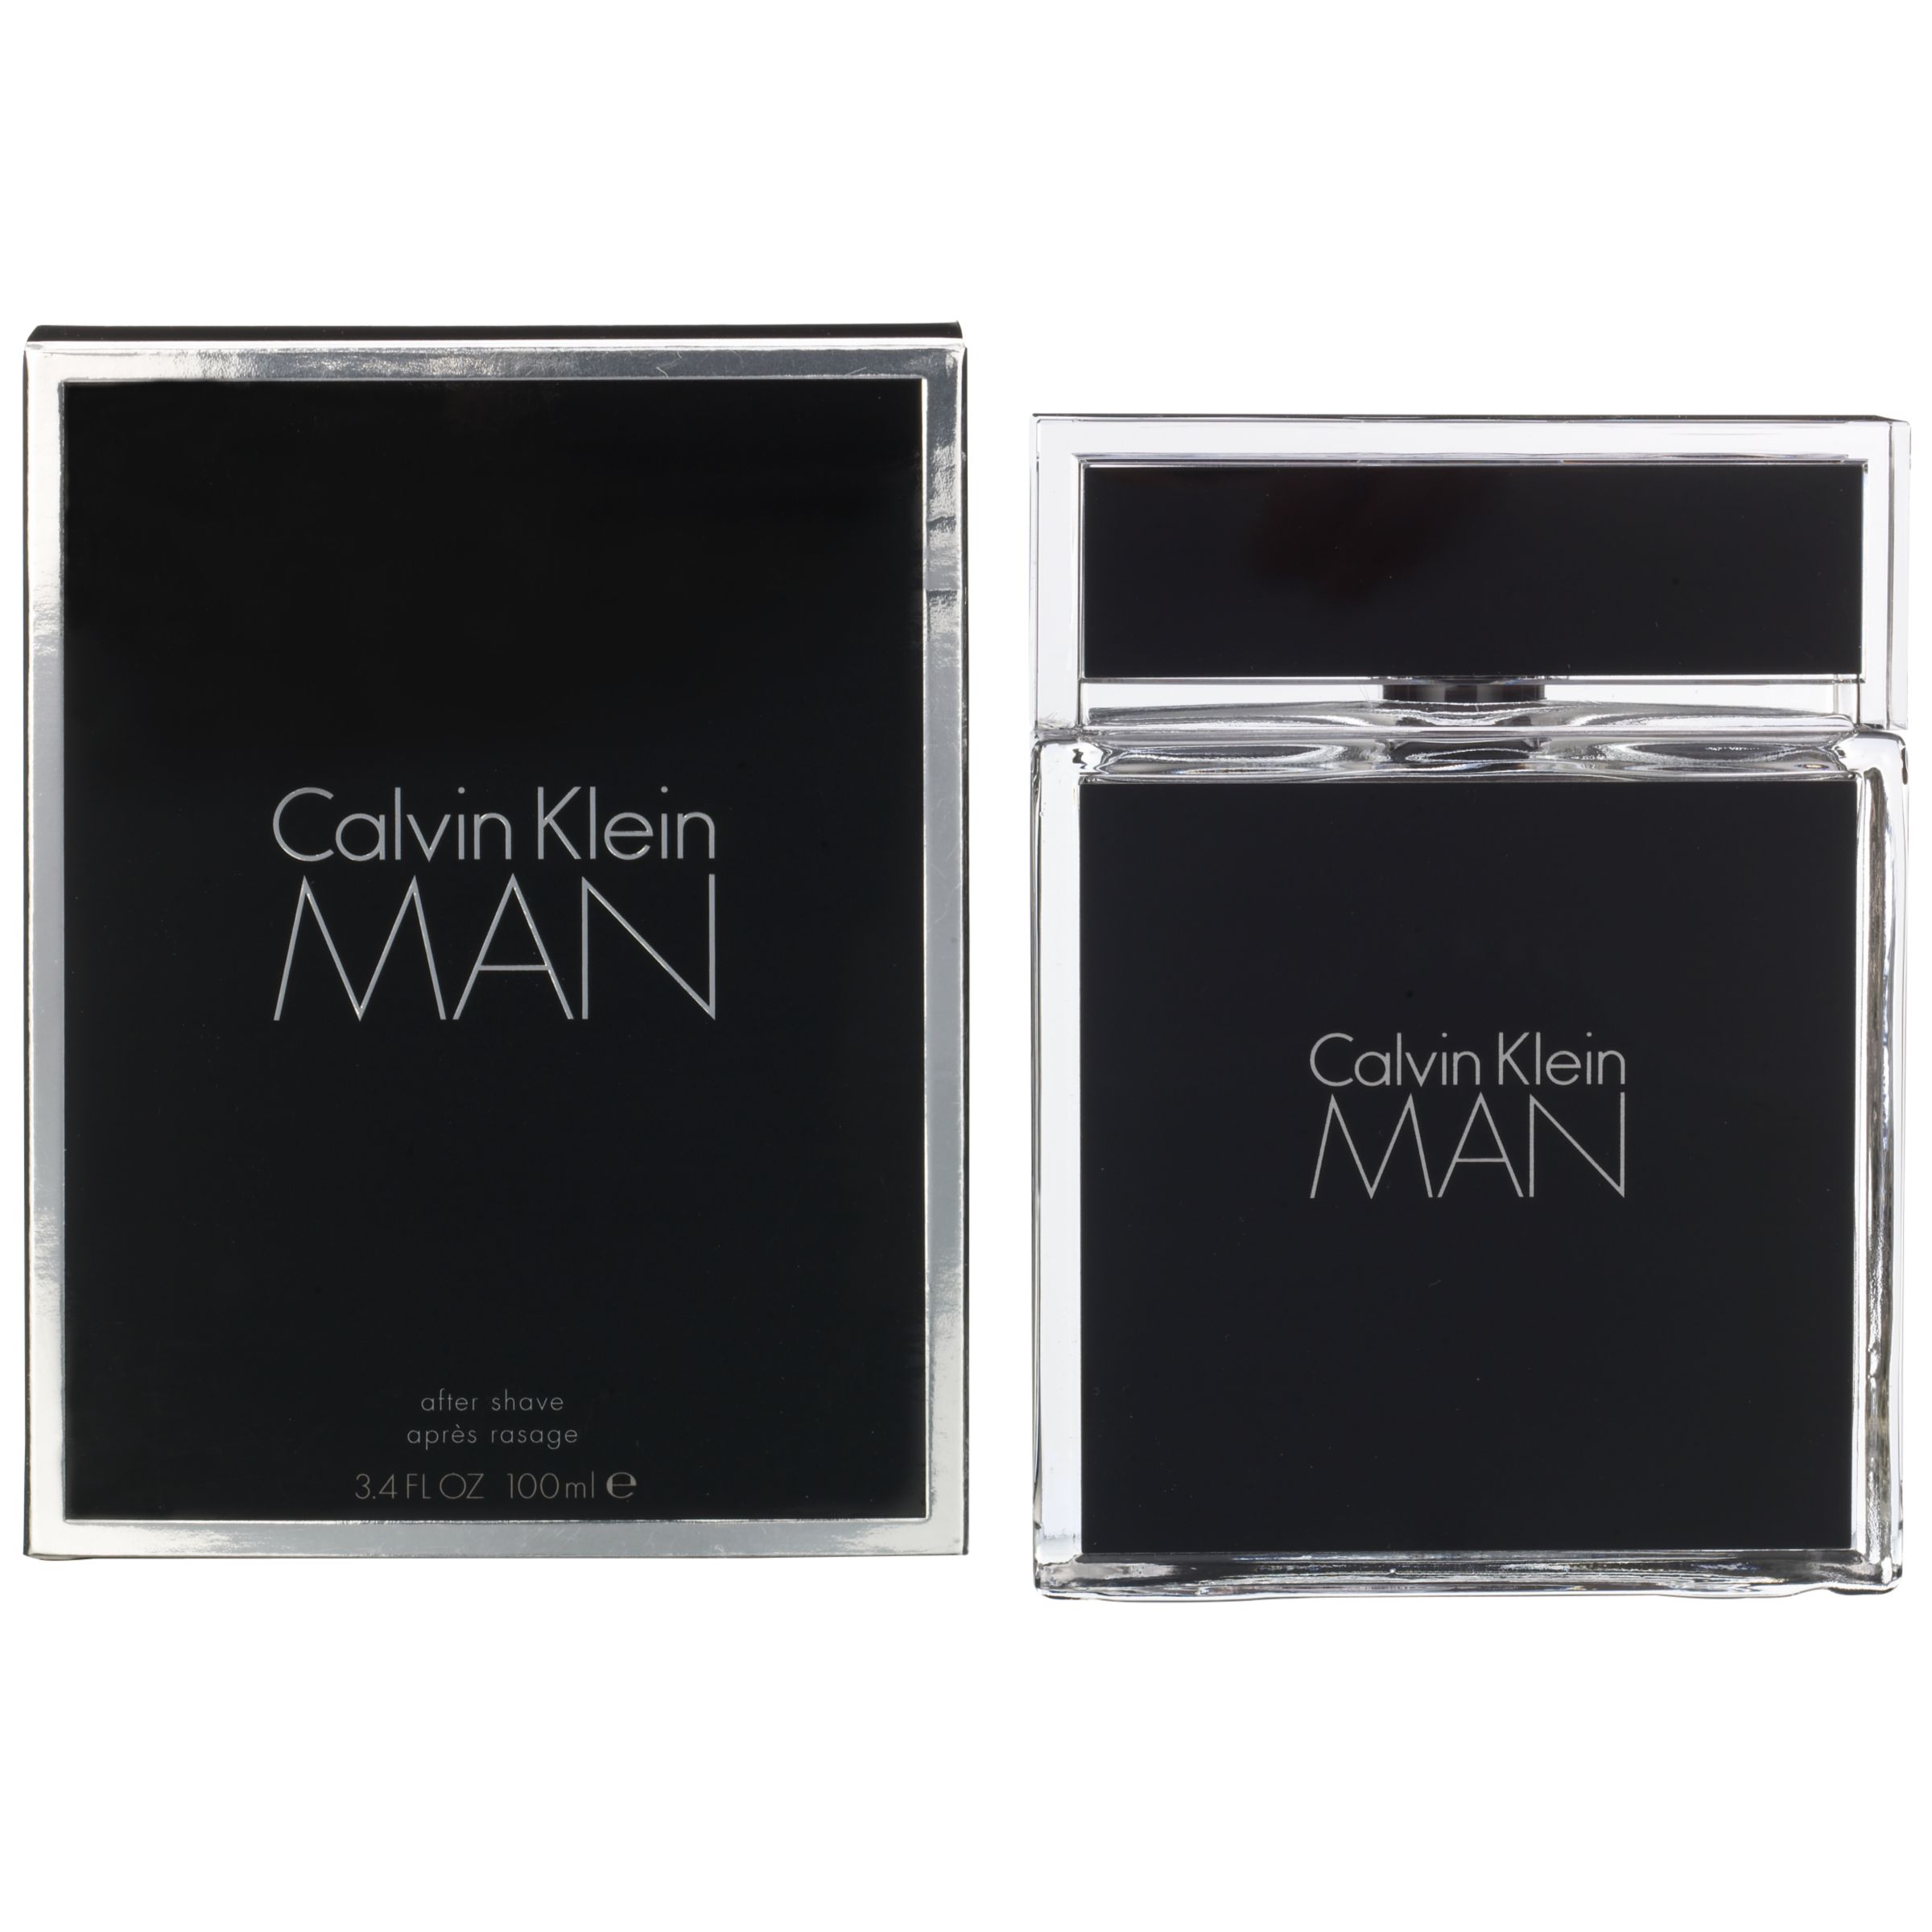 Man Aftershave, 100ml